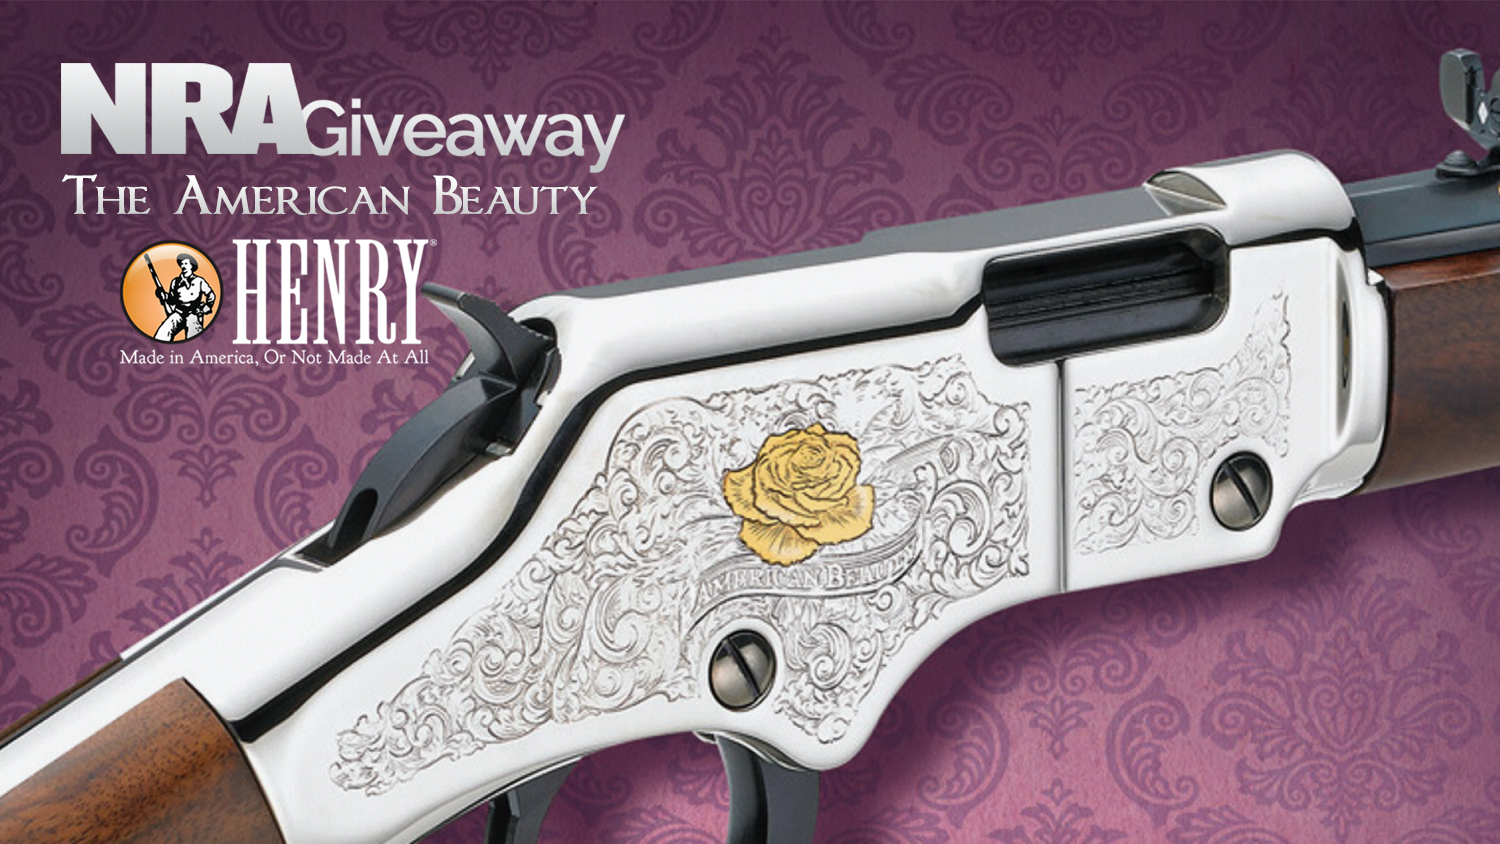 Enter the Henry NRA Giveaway!